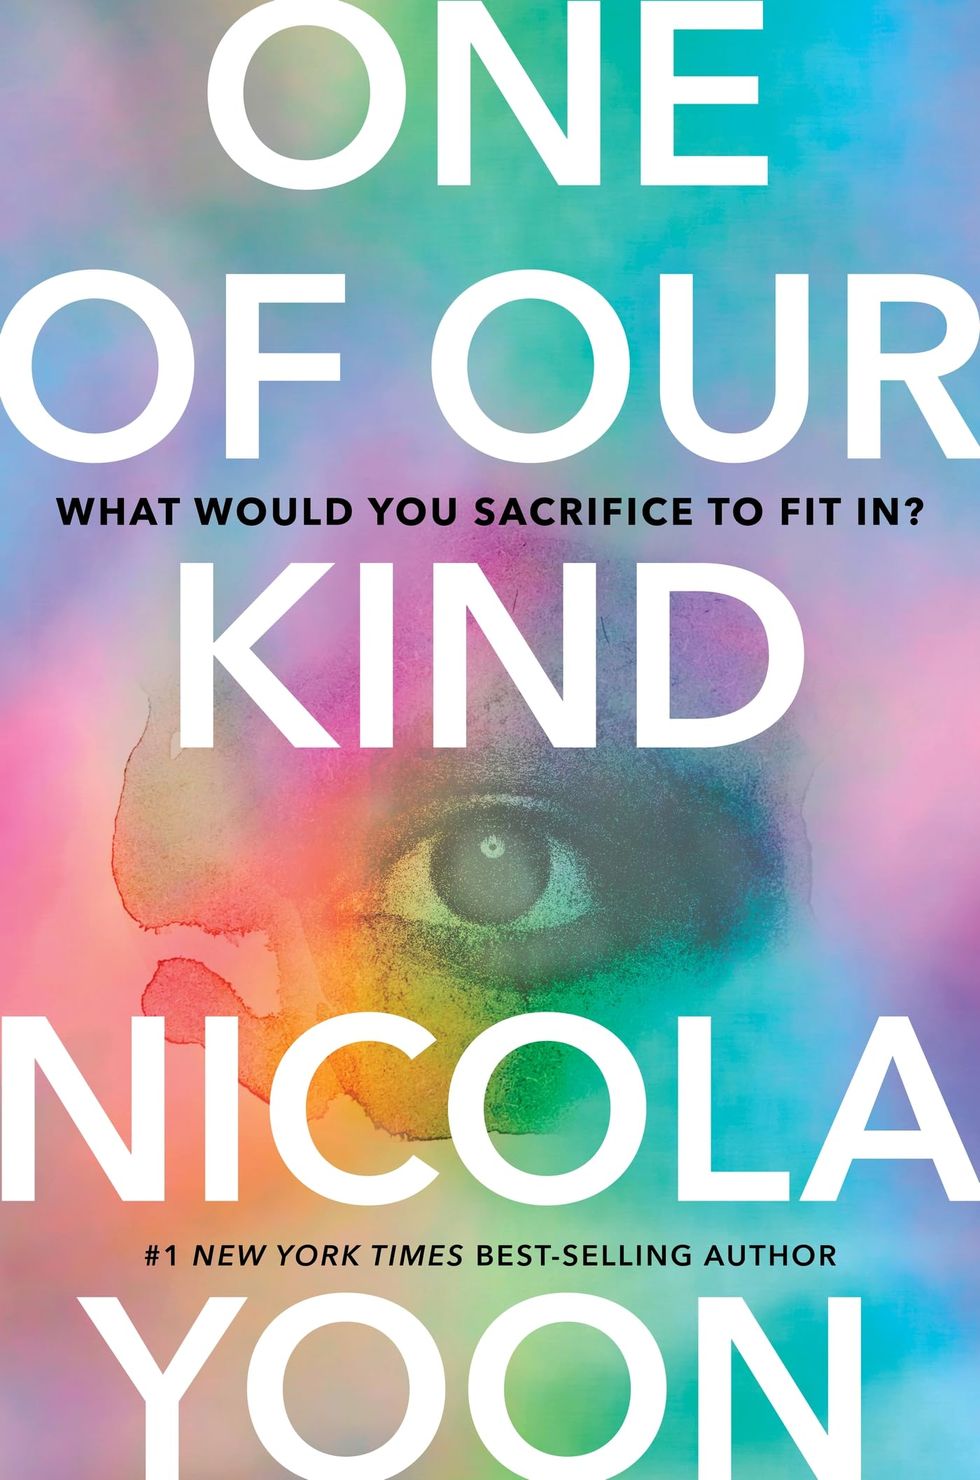 One Of Our Kind by Nicola Yoon, RRP: £20